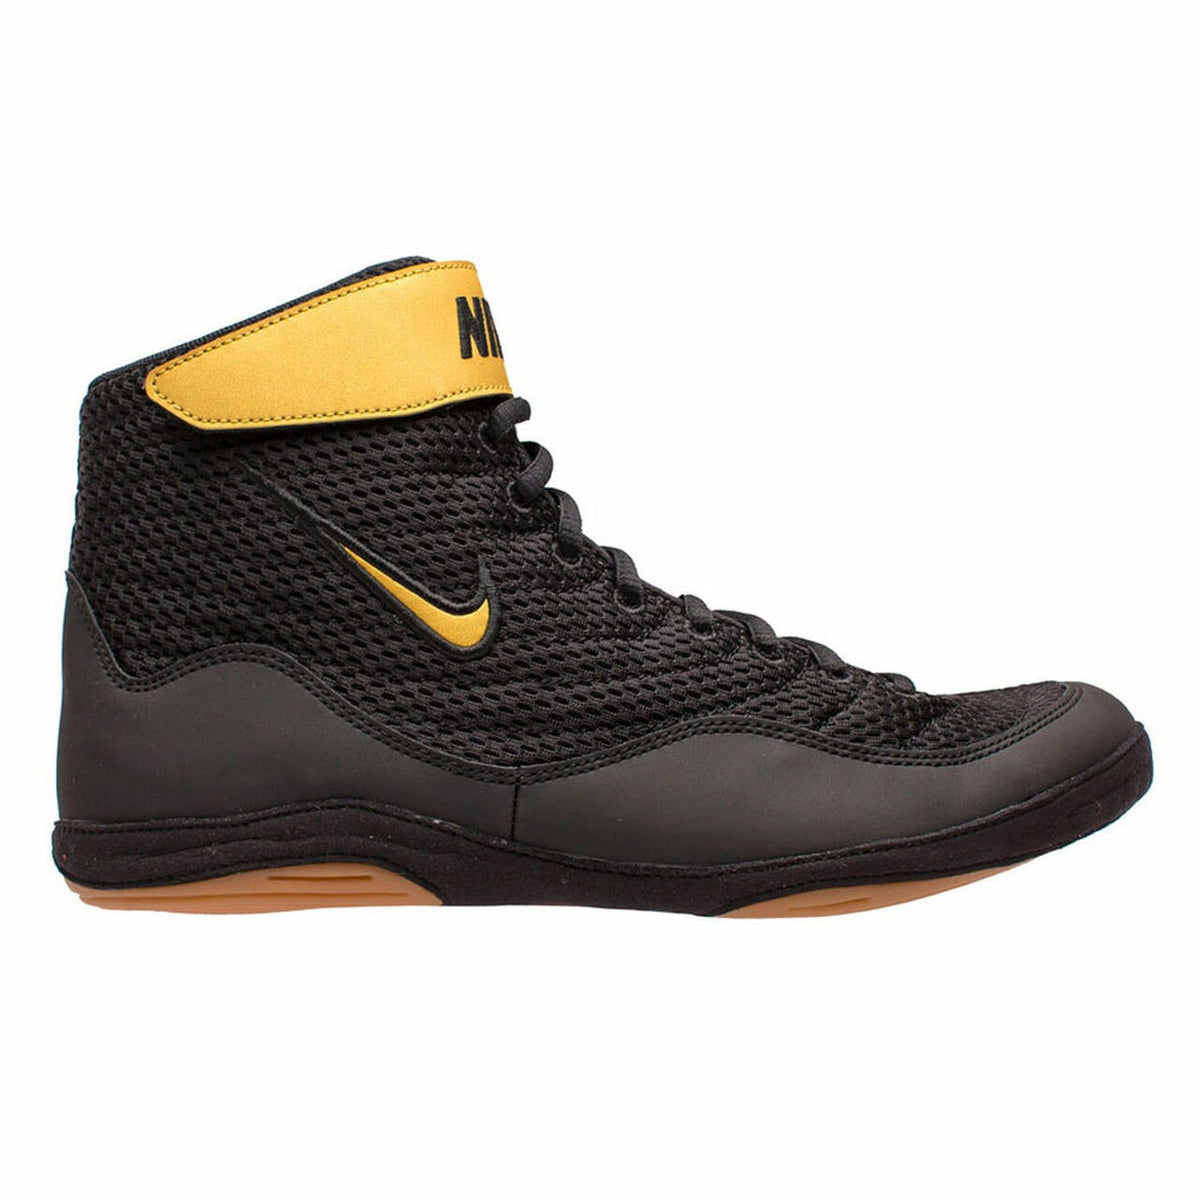 Nike Inflic 3 wrestling shoes. The advanced wrestling shoe for beginners and advanced wrestlers. With high traction on the mat and extra Velcro on the ankle. Nike has great quality and comfort. Here in the color black/gold.